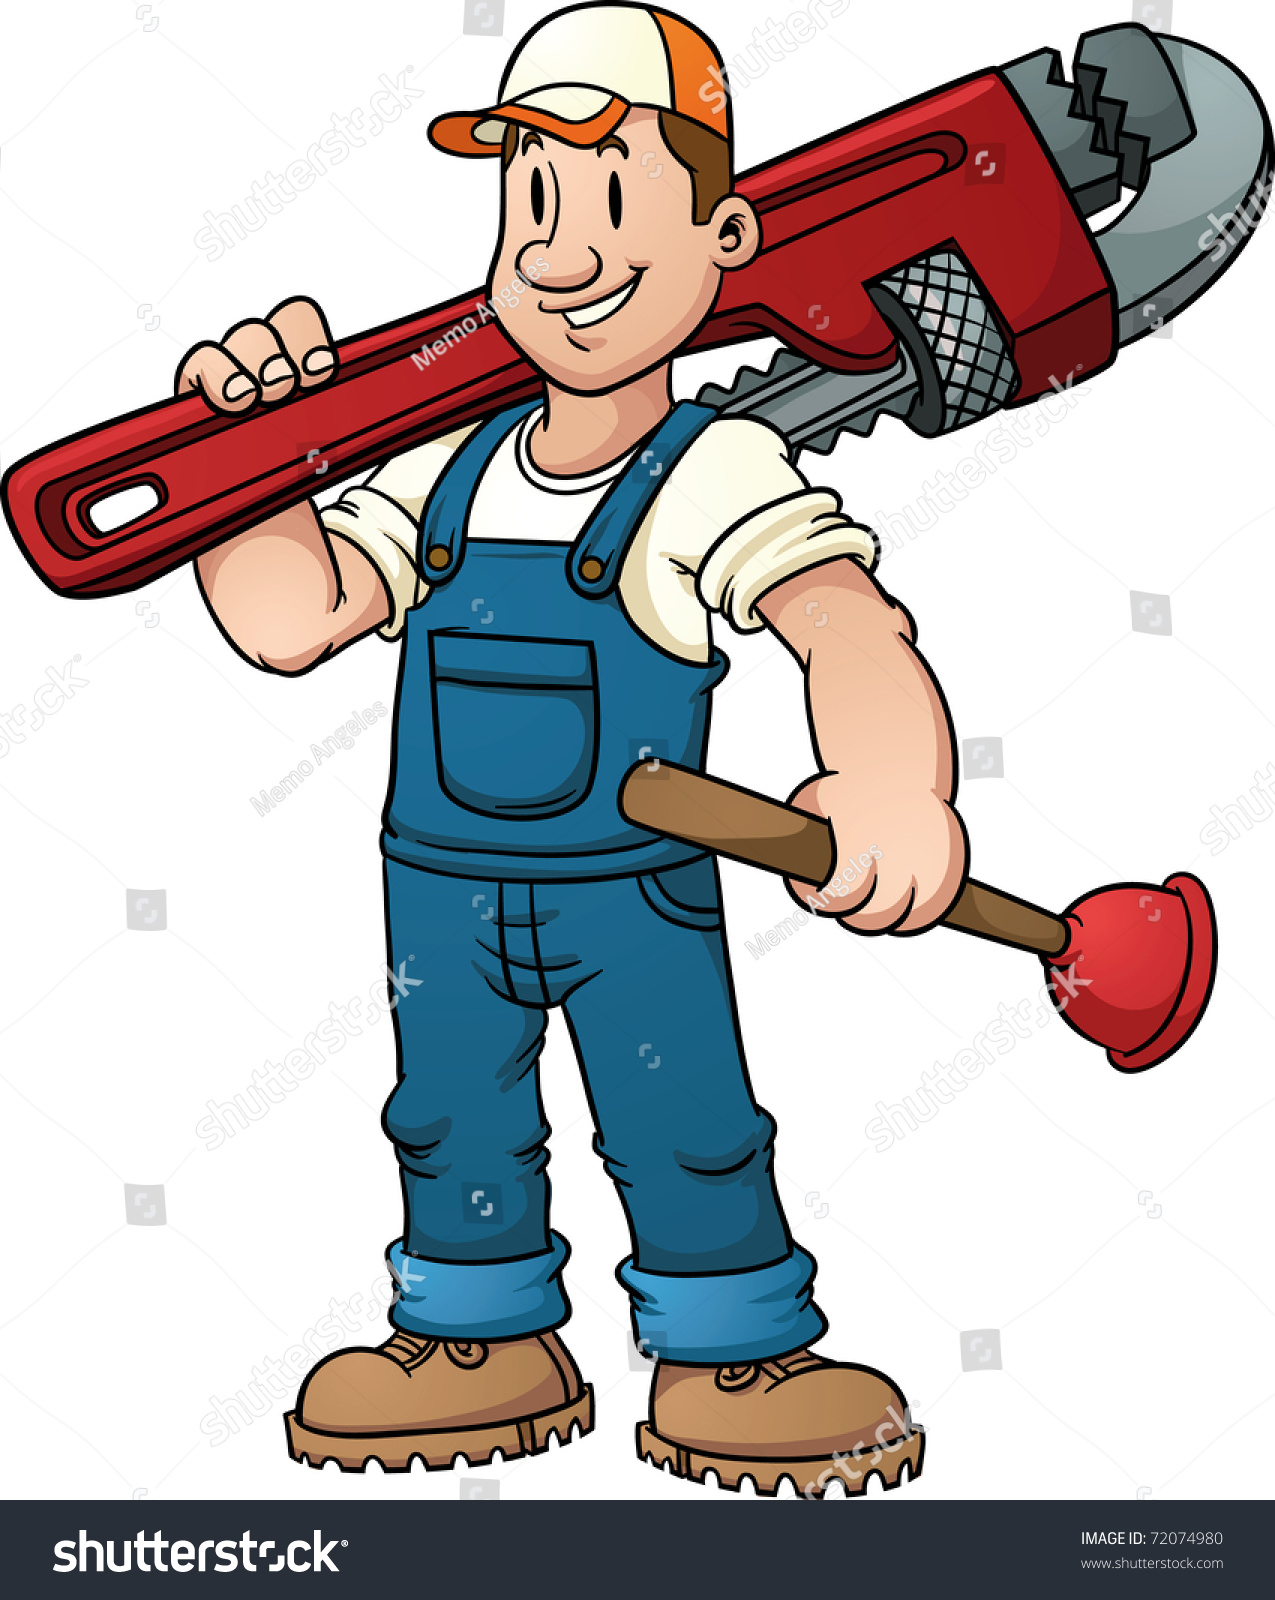 stock-vector-cartoon-plumber-holding-a-big-wrench-vector-illustration-with-simple-gradients-72074980.jpg